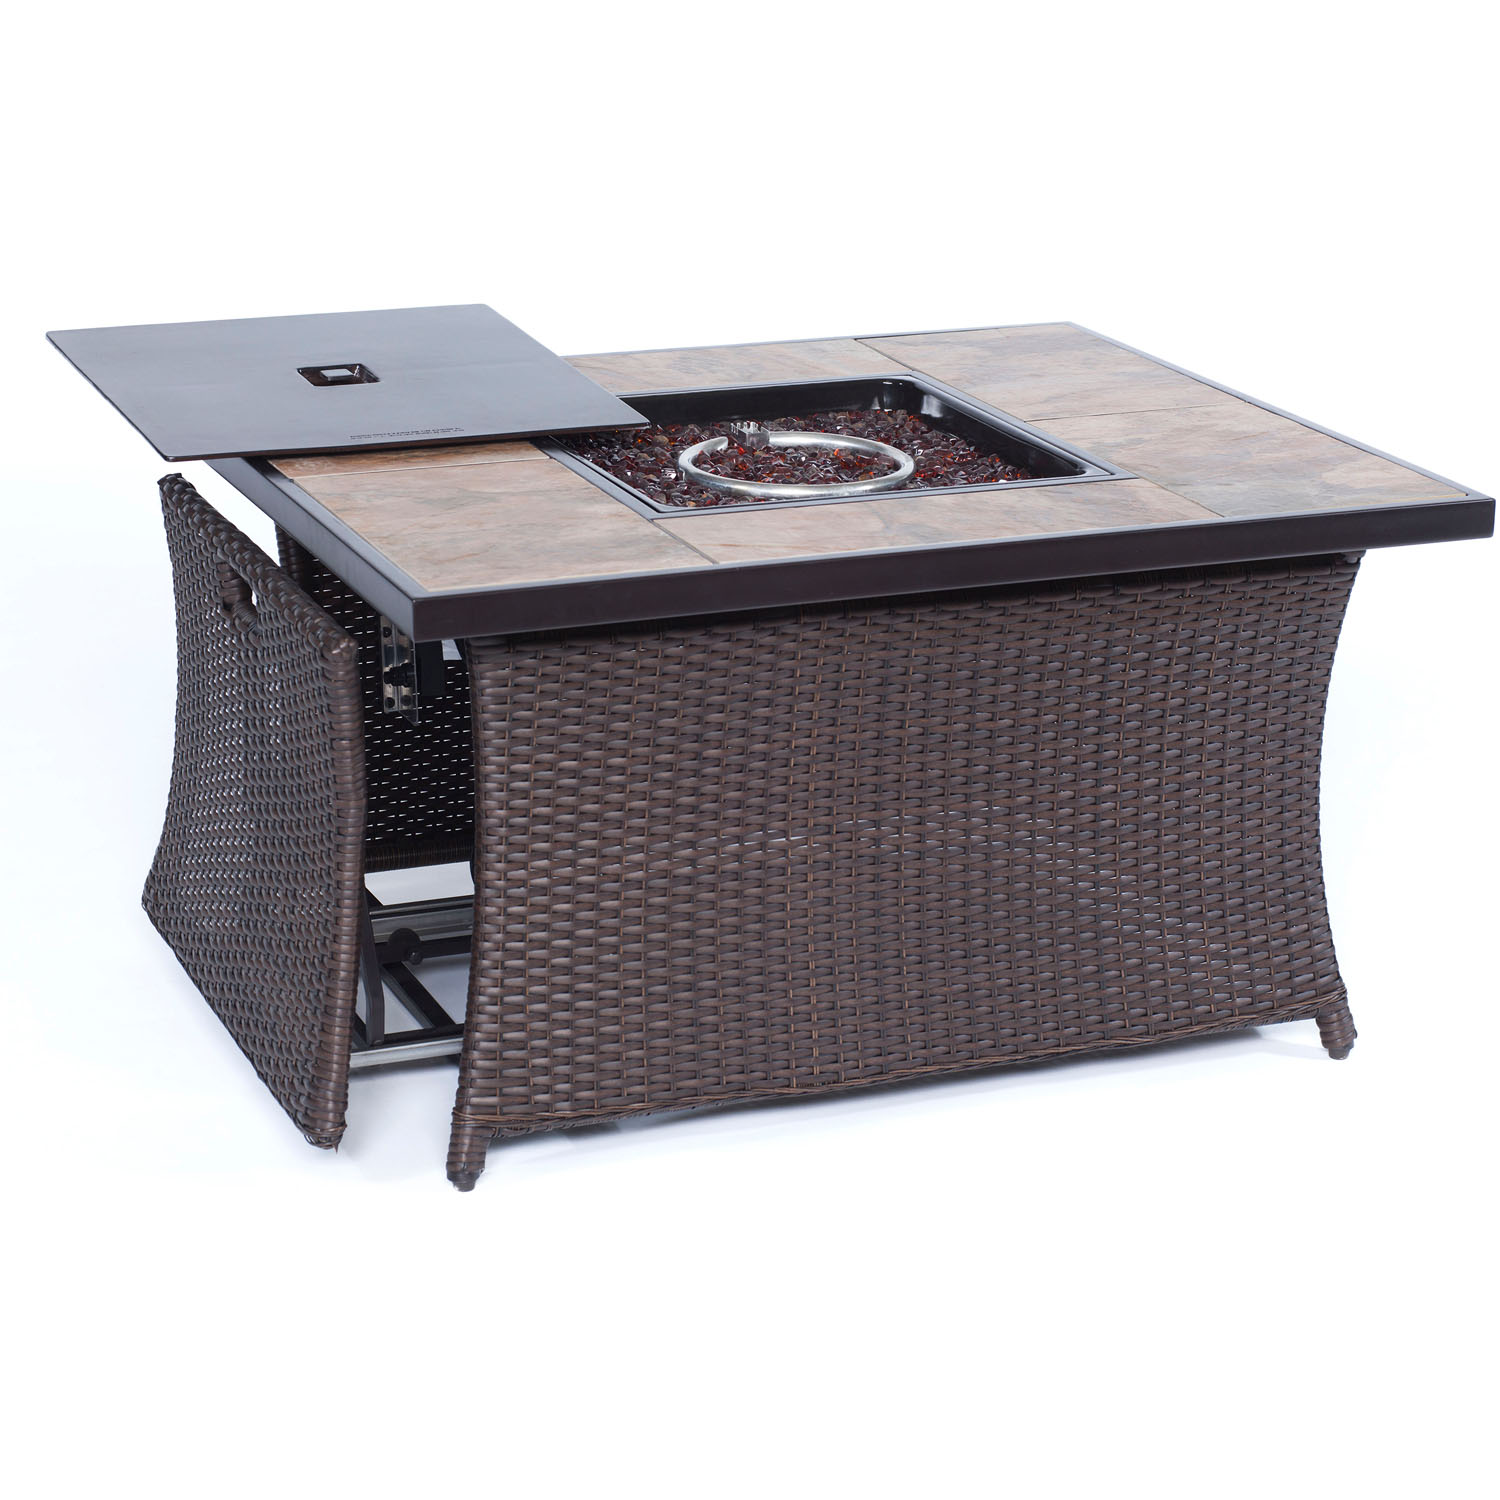 Hanover Ventura 4-Piece Fire Pit Lounge Set with Faux-Stone Tile Top - image 5 of 12